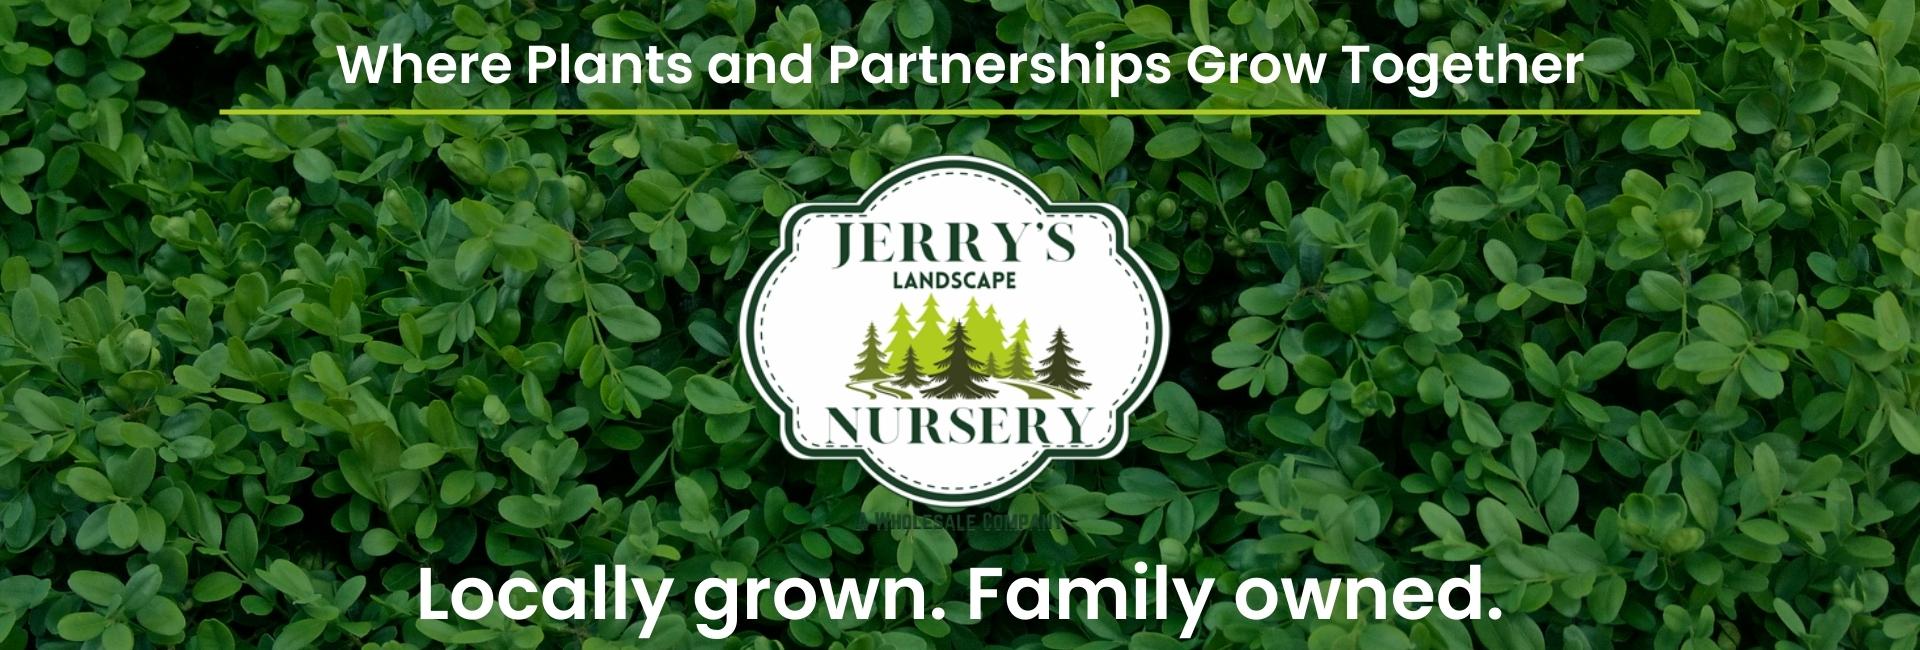 jerrys home page image